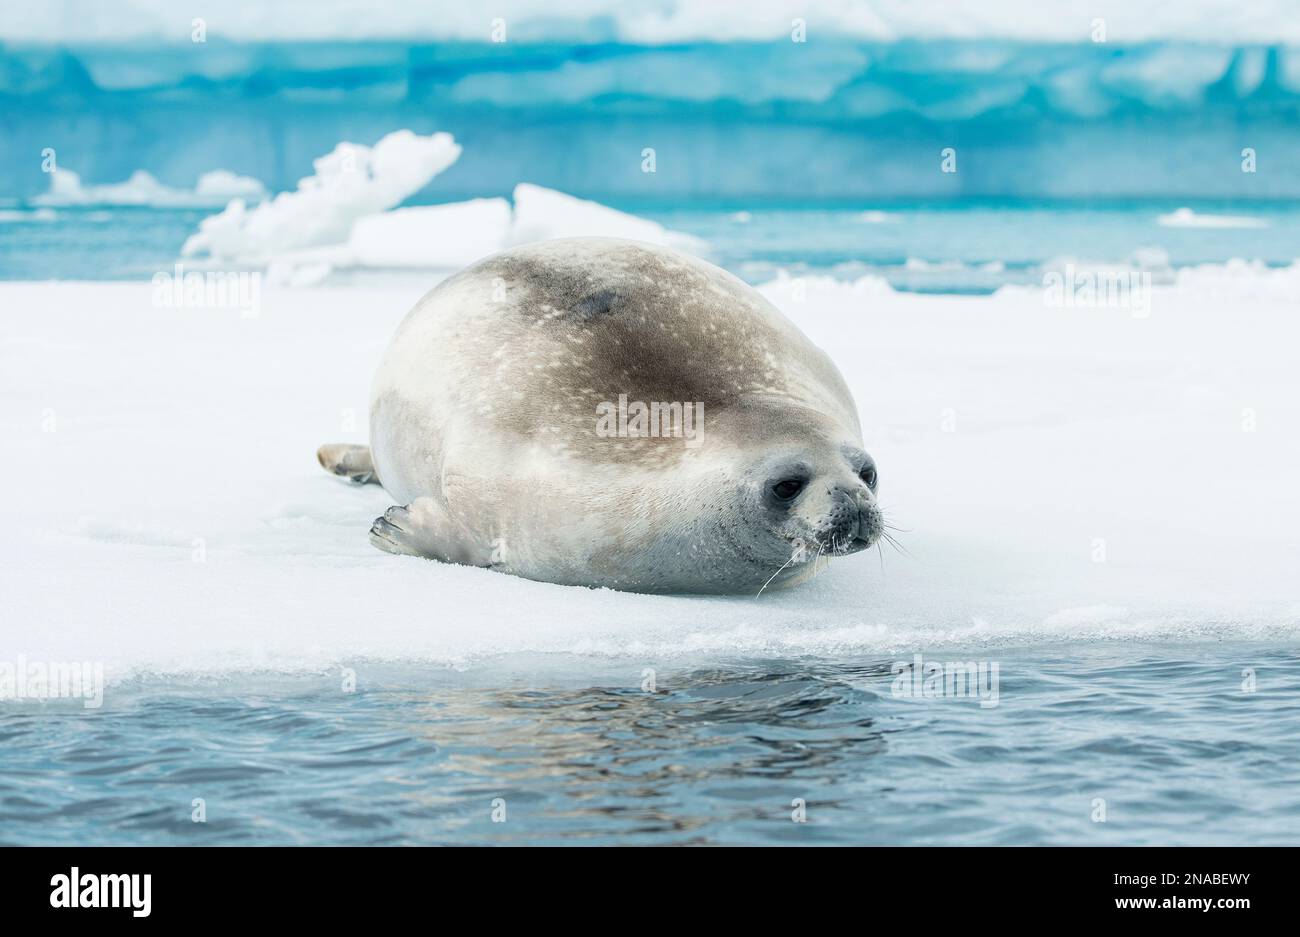 A Crabeater seal (Lobodon carcinophaga) rests on ice near an iceberg in the Errera Channel of the Antarctic; Antarctica Stock Photo